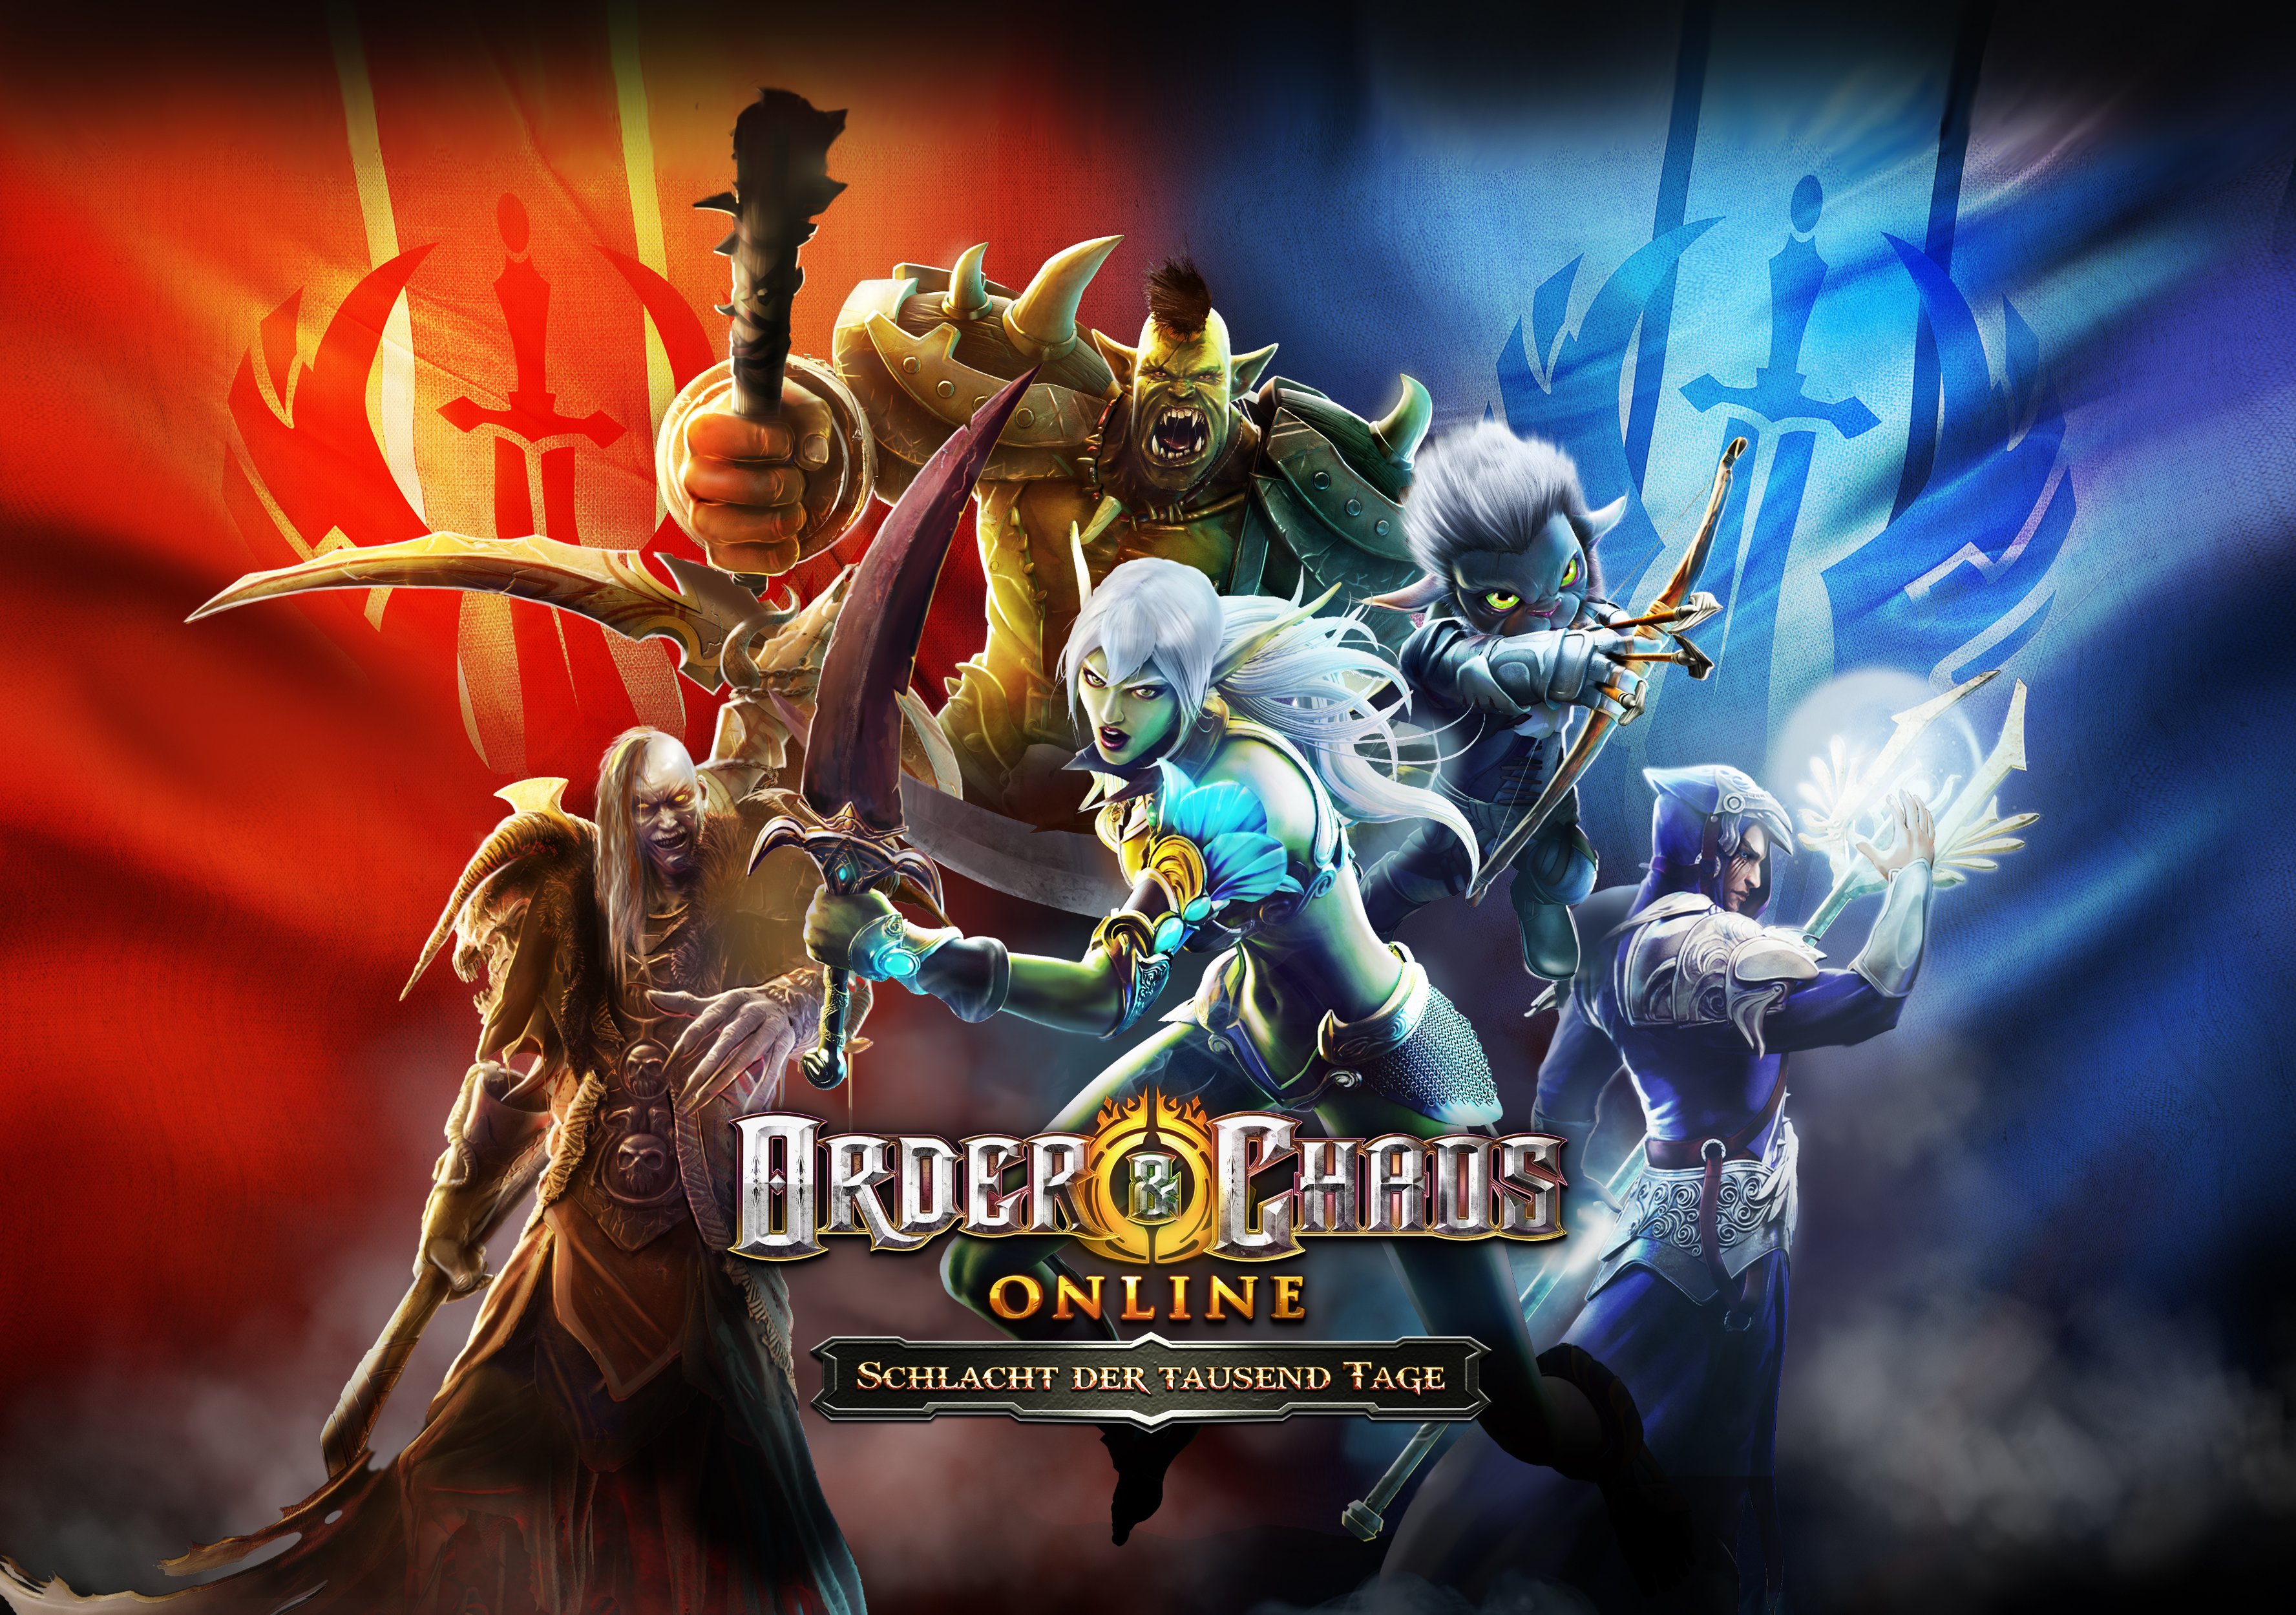 HEROES ORDER CHAOS fantasy fighting action adventure mmo online